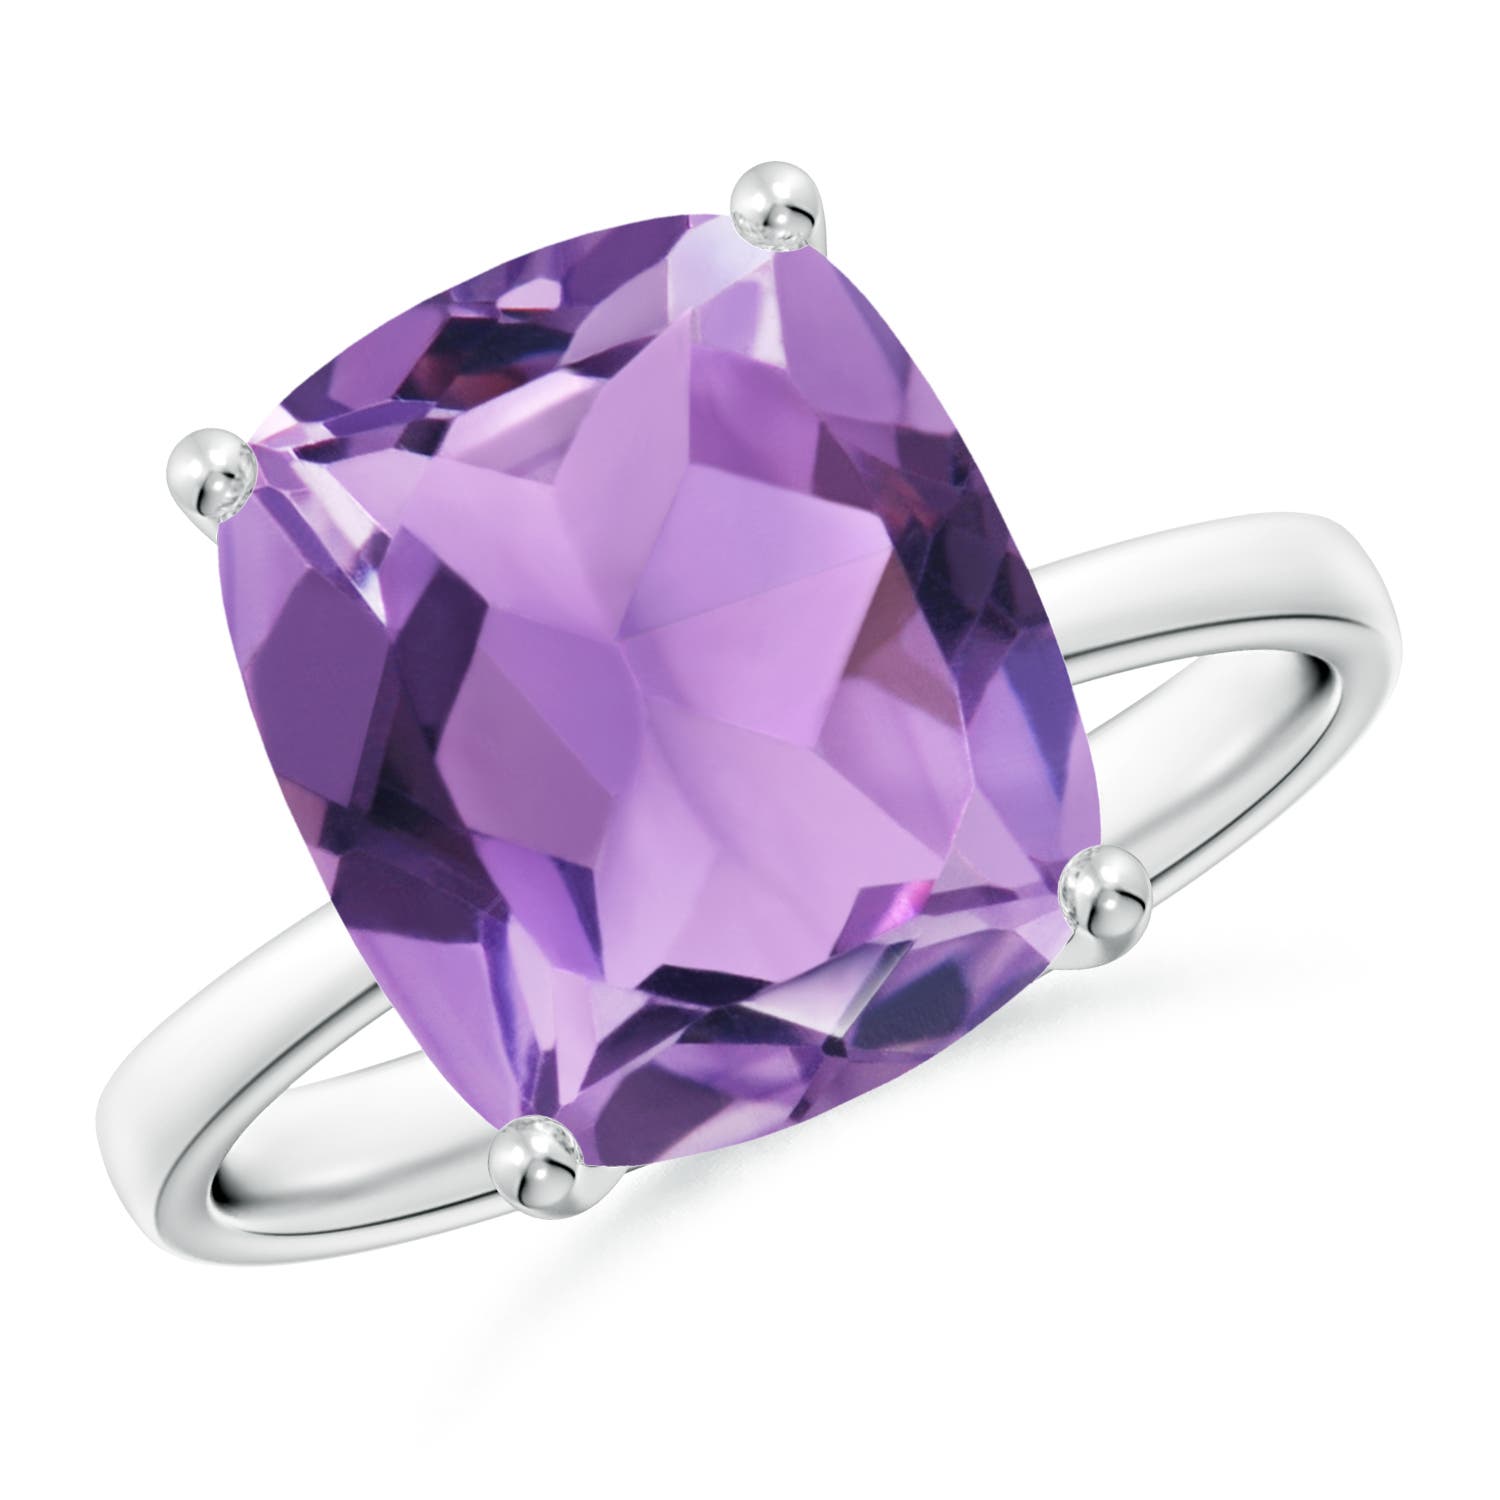 A - Amethyst / 4.6 CT / 14 KT White Gold